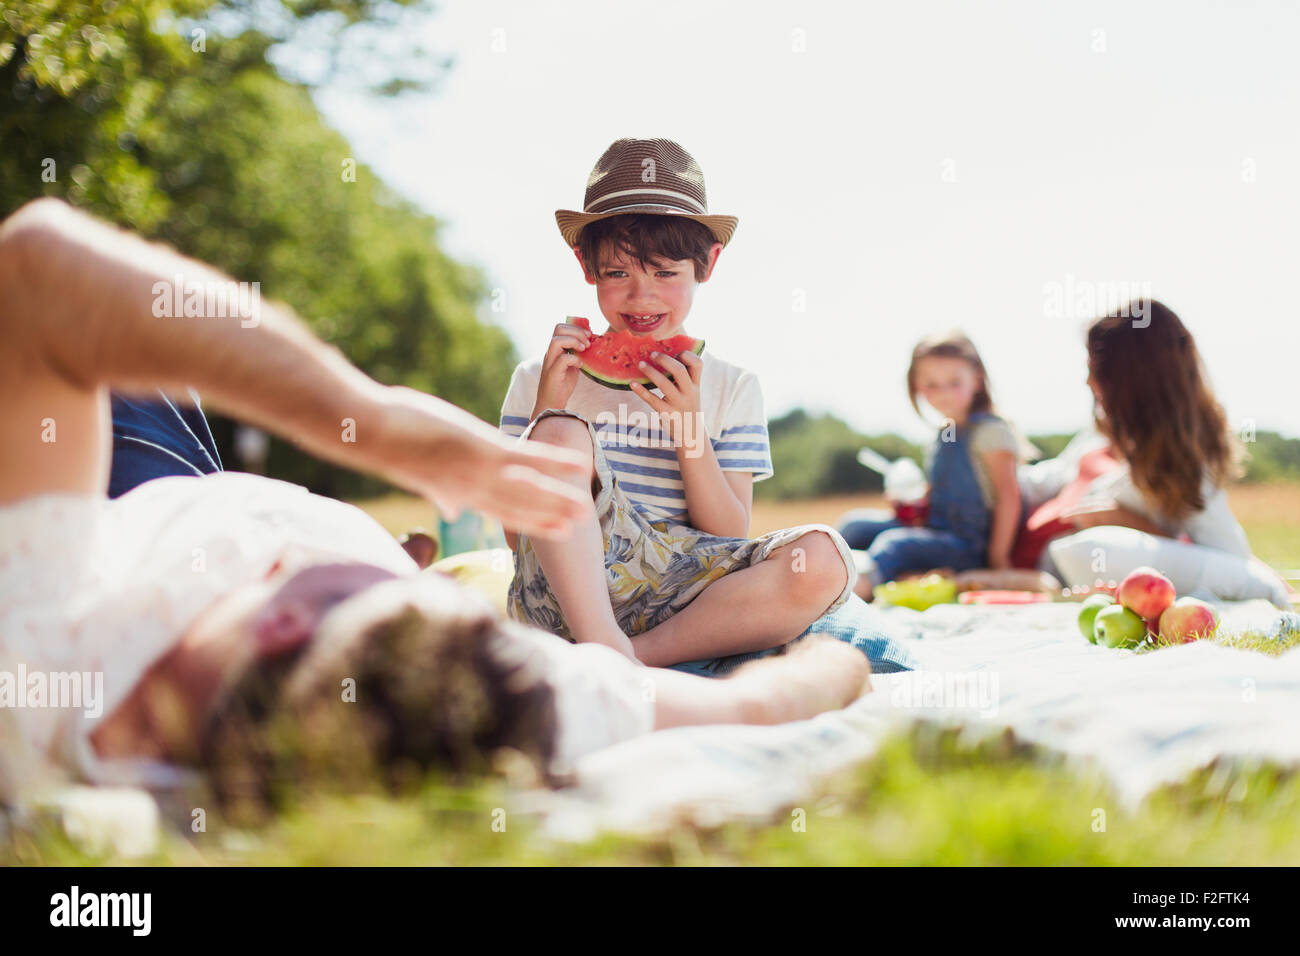 Smiling boy eating watermelon on blanket in sunny field Stock Photo